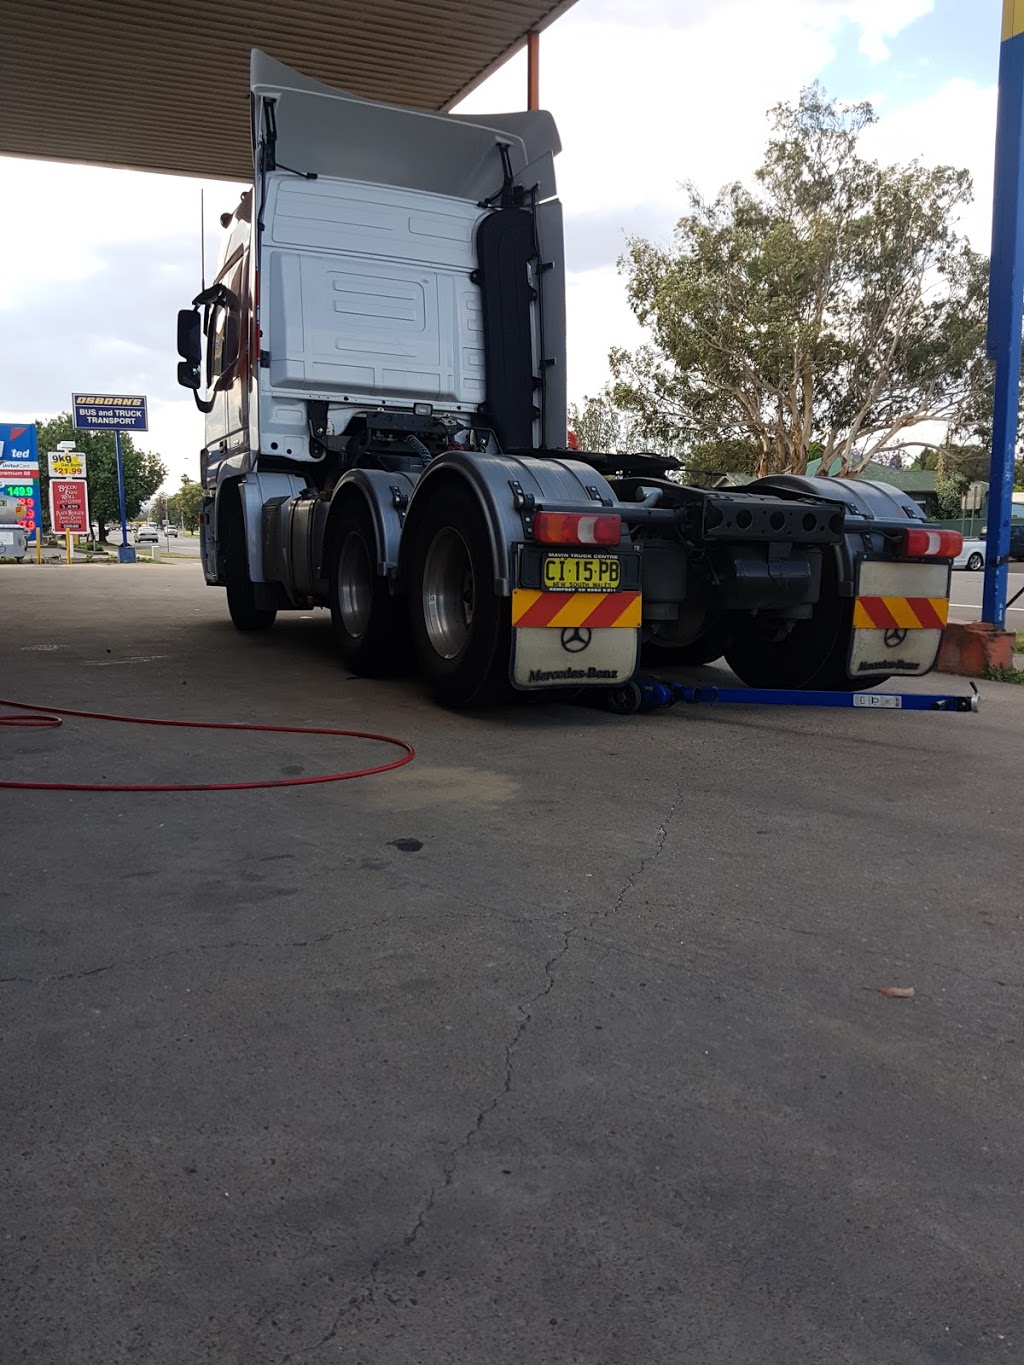 Beaurepaires for Tyres Muswellbrook | car repair | 53/55 Maitland St, Muswellbrook NSW 2333, Australia | 0265432590 OR +61 2 6543 2590